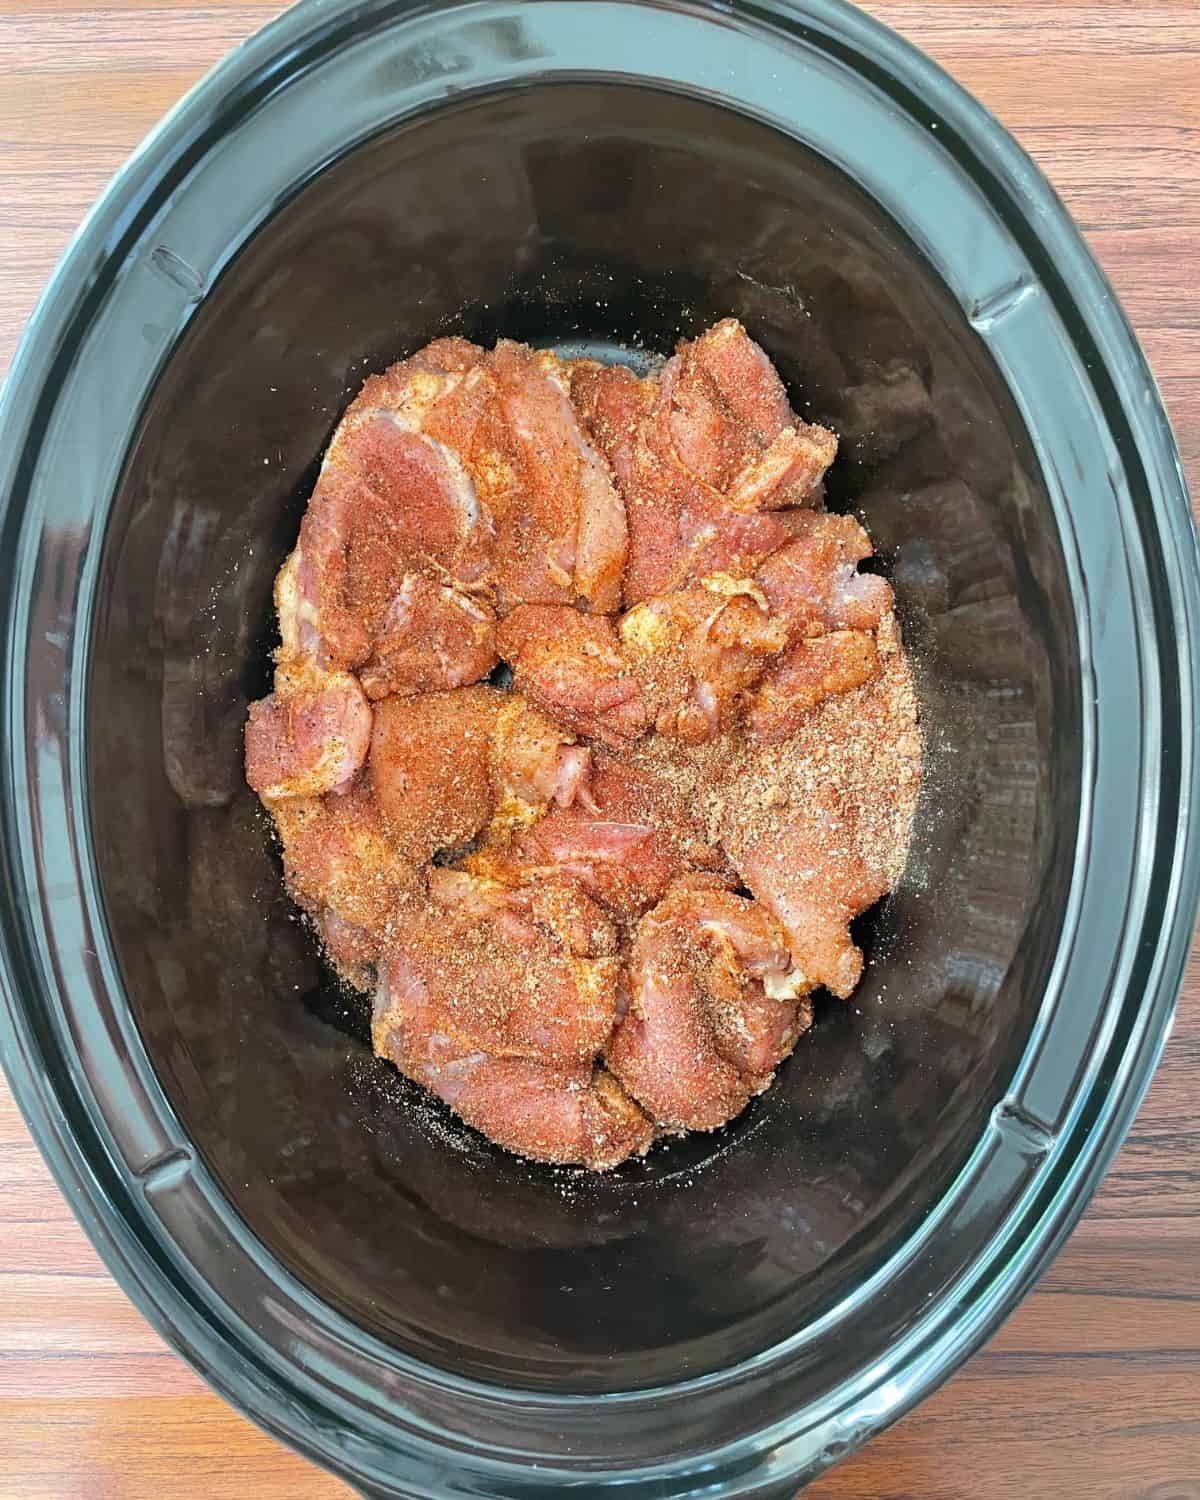 Boneless chicken thighs seasoned with BBQ seasoning in a slow cooker.